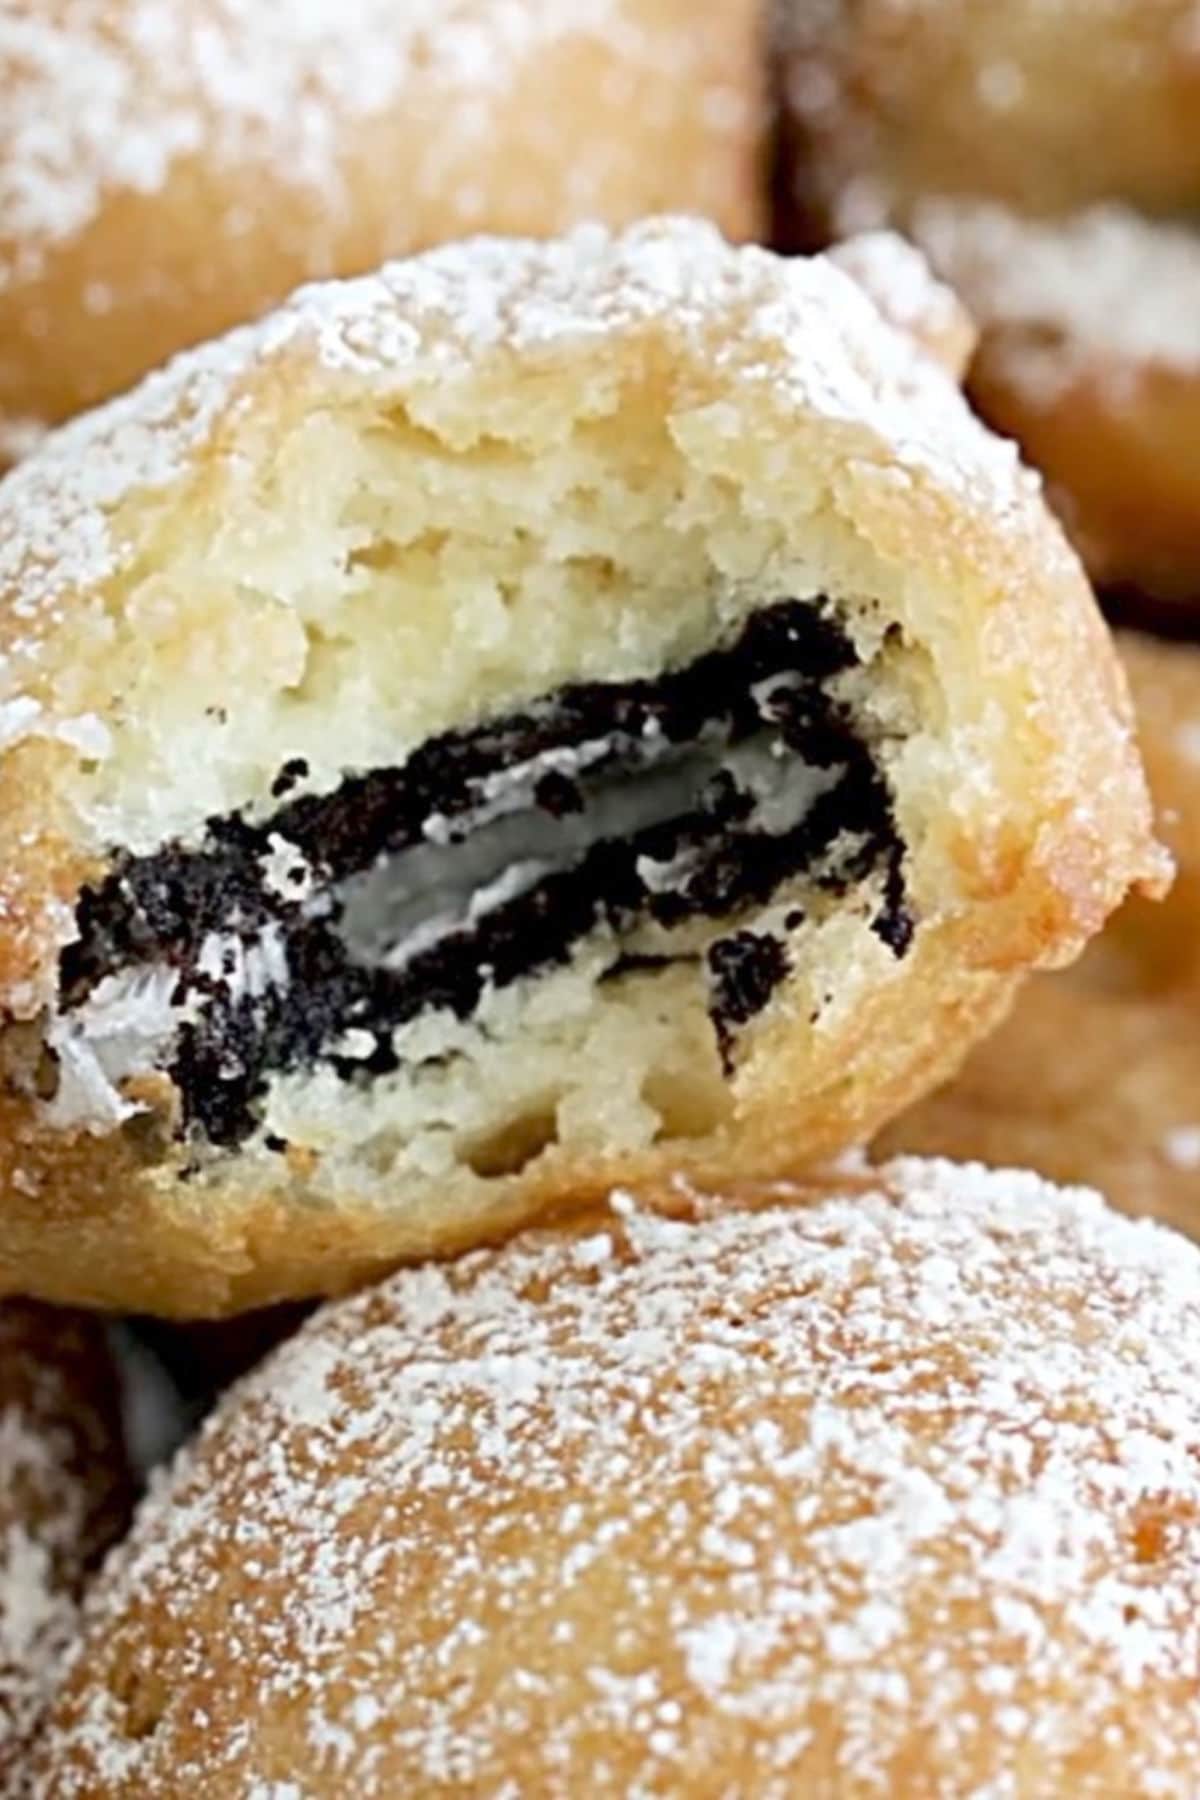 A closeup of a deep-fried Oreo with a bite taken out of it.